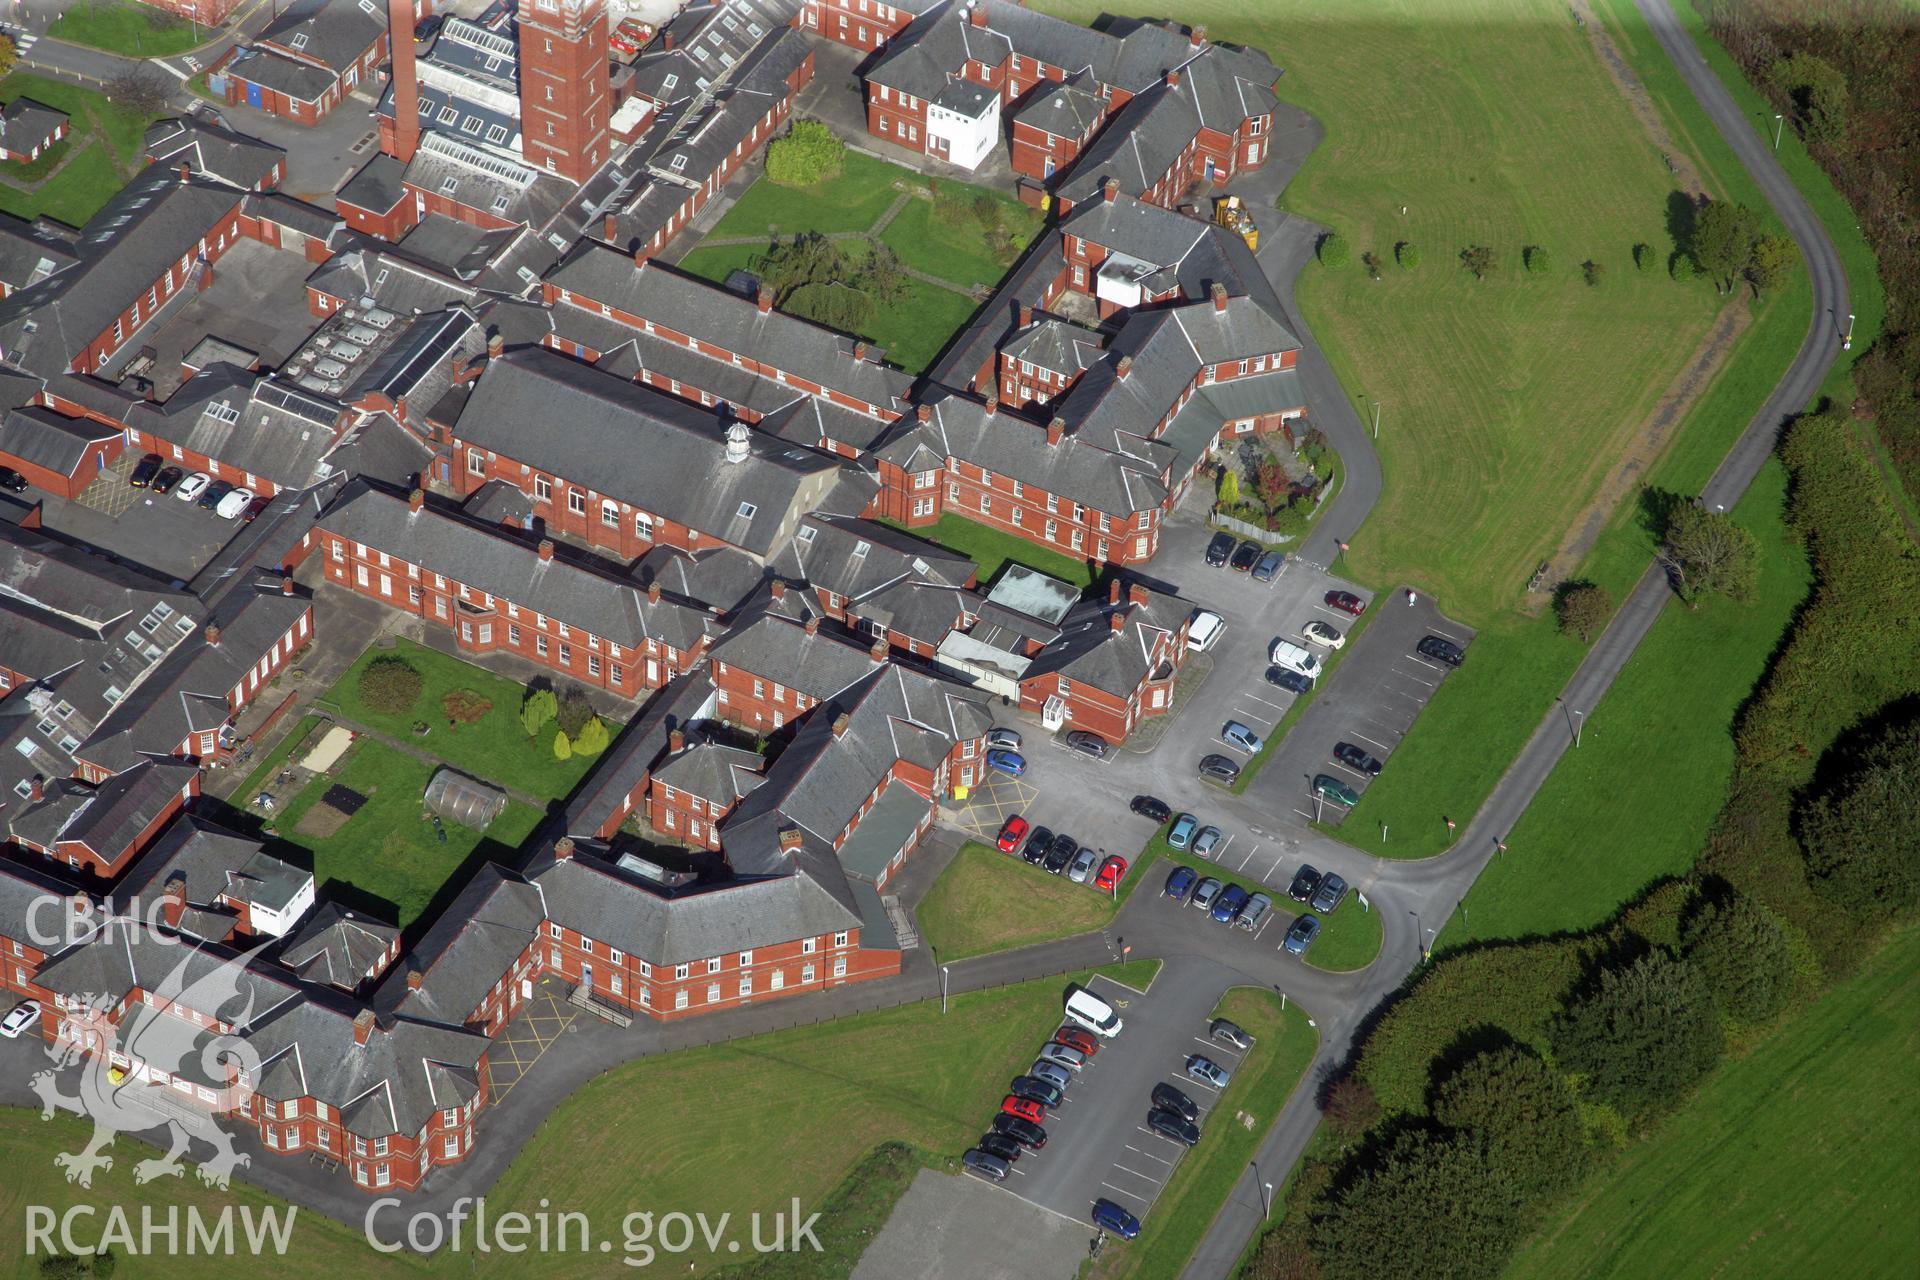 RCAHMW colour oblique photograph of Cefn Coed Hospital, viewed from the south. Taken by Toby Driver and Oliver Davies on 28/09/2011.